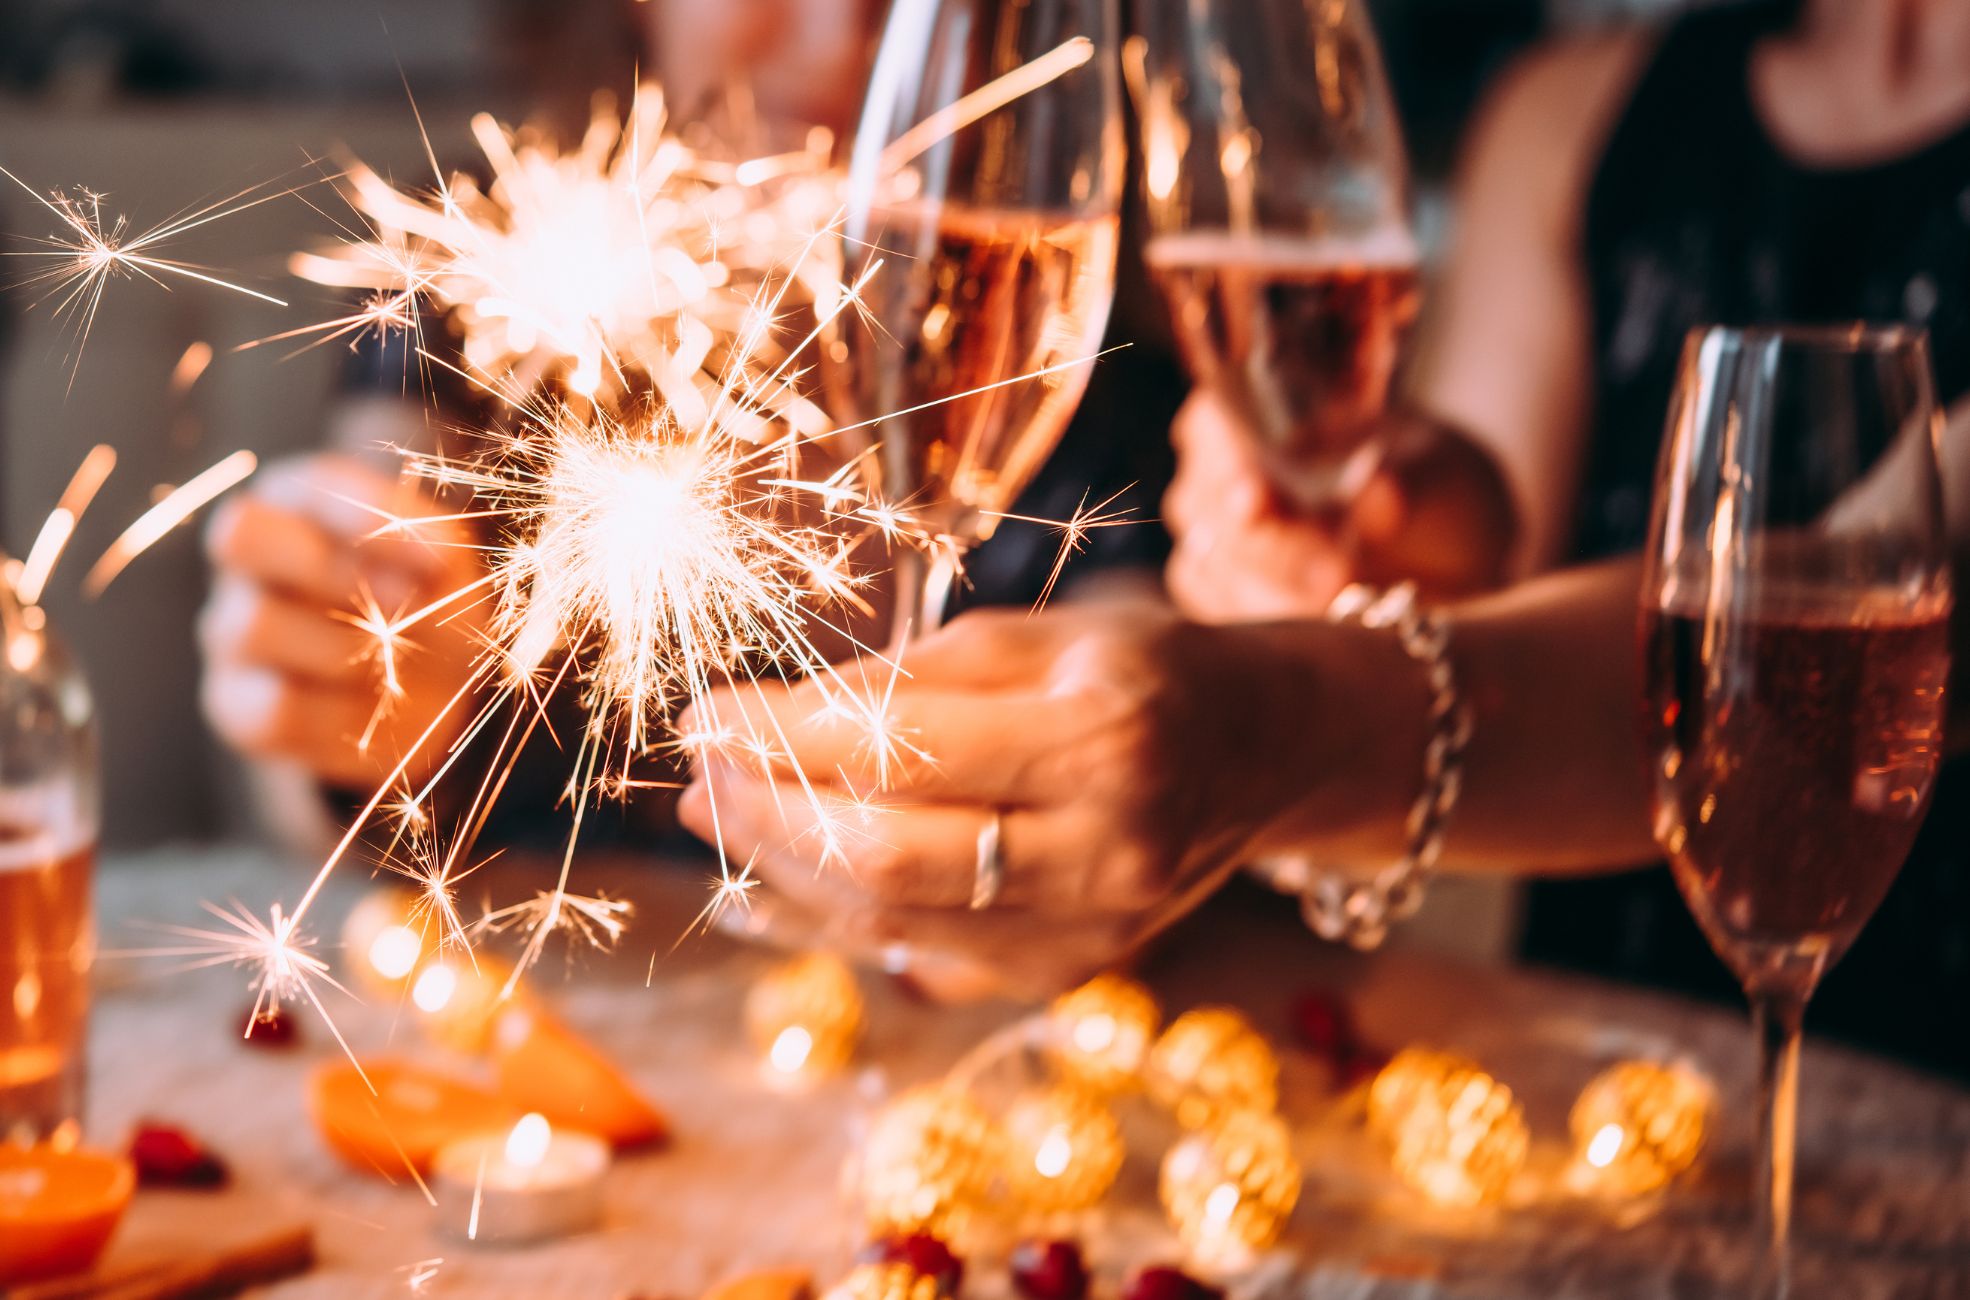 Sparklers And Wine At Christmas Party